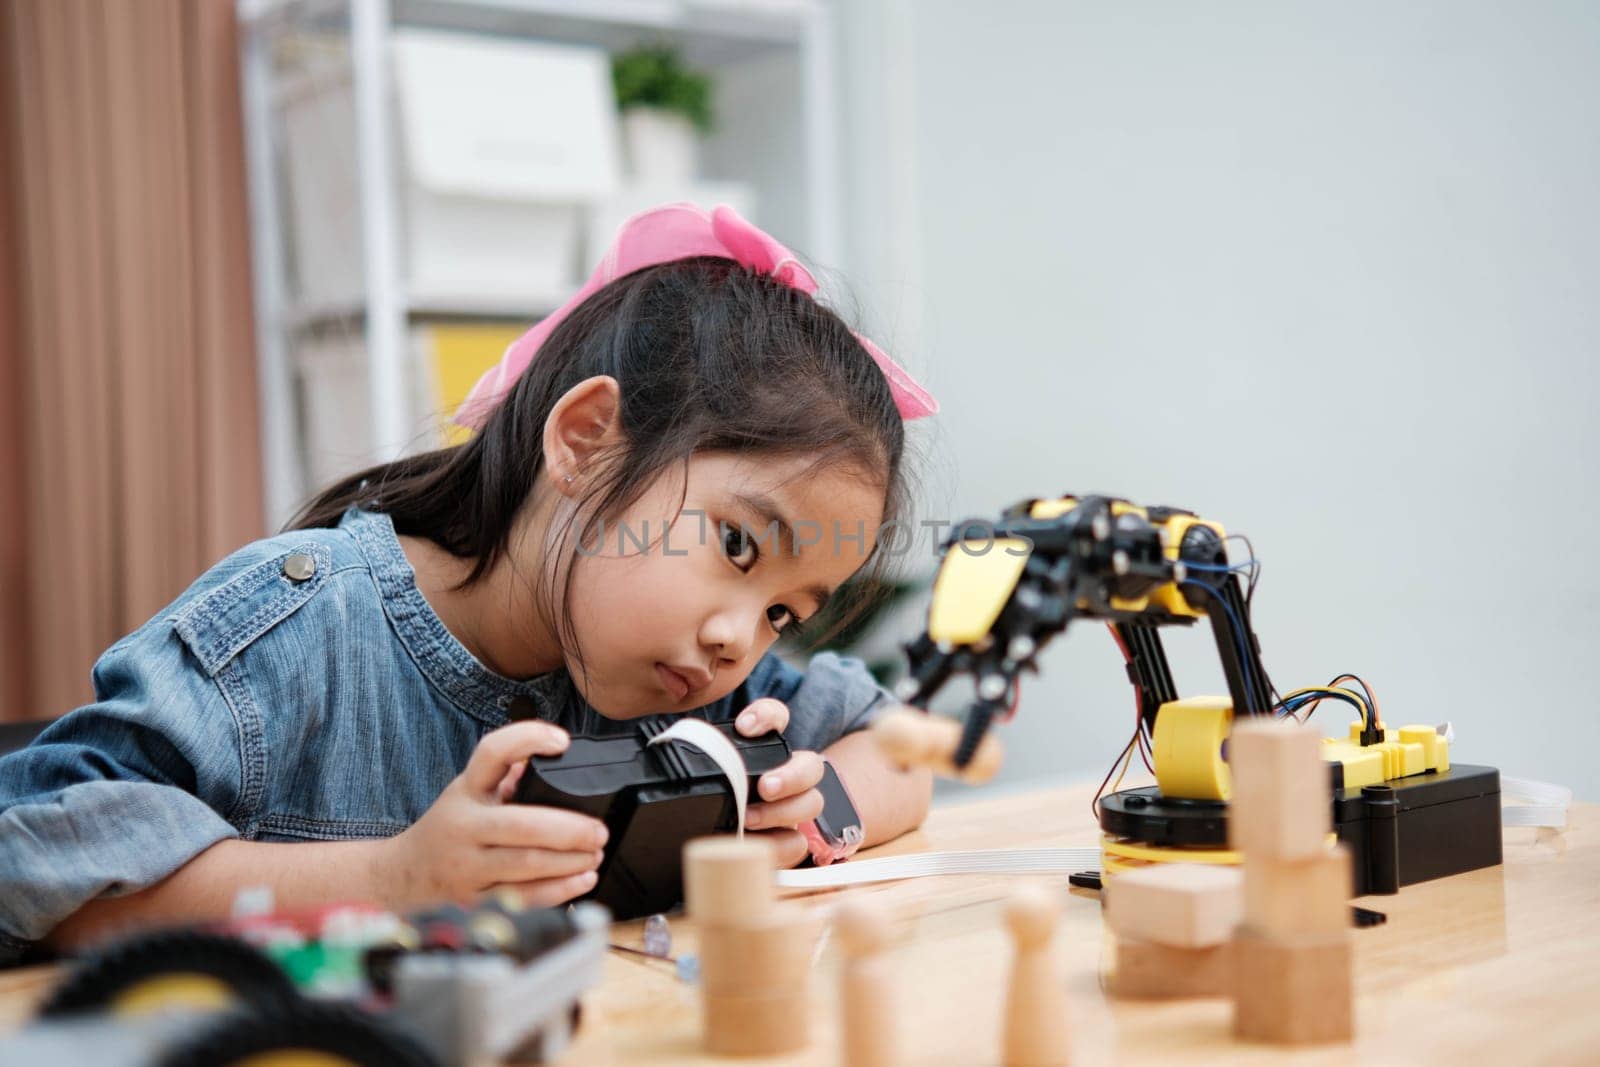 A primary school girl focuses on operating a robotic arm with a remote control, demonstrating STEM education in action.